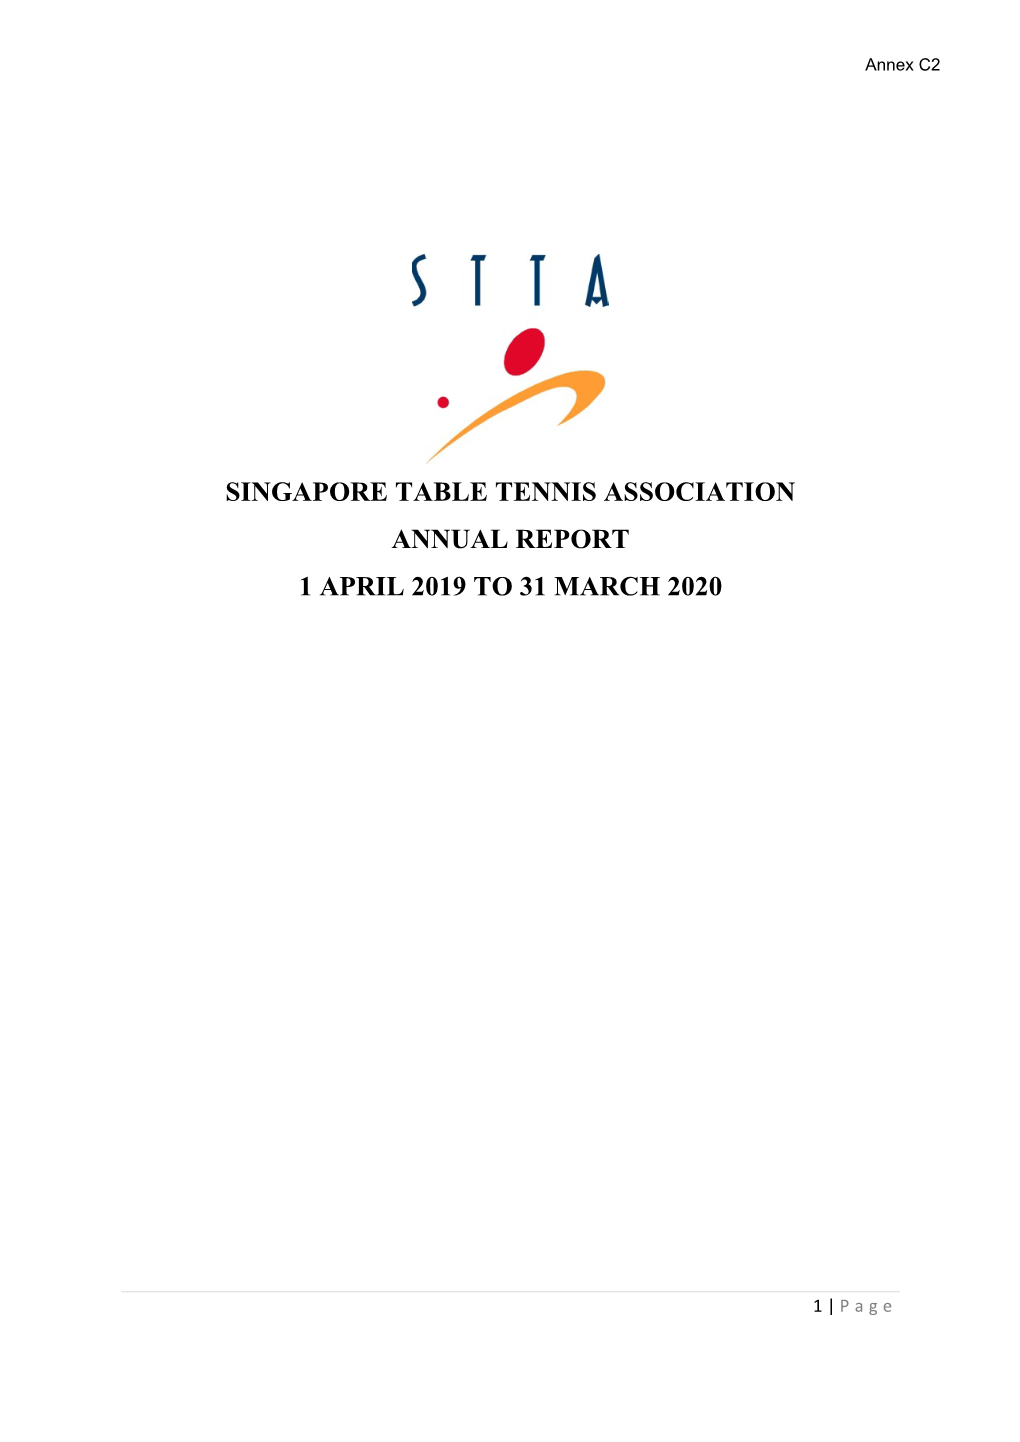 Singapore Table Tennis Association Annual Report 1 April 2019 to 31